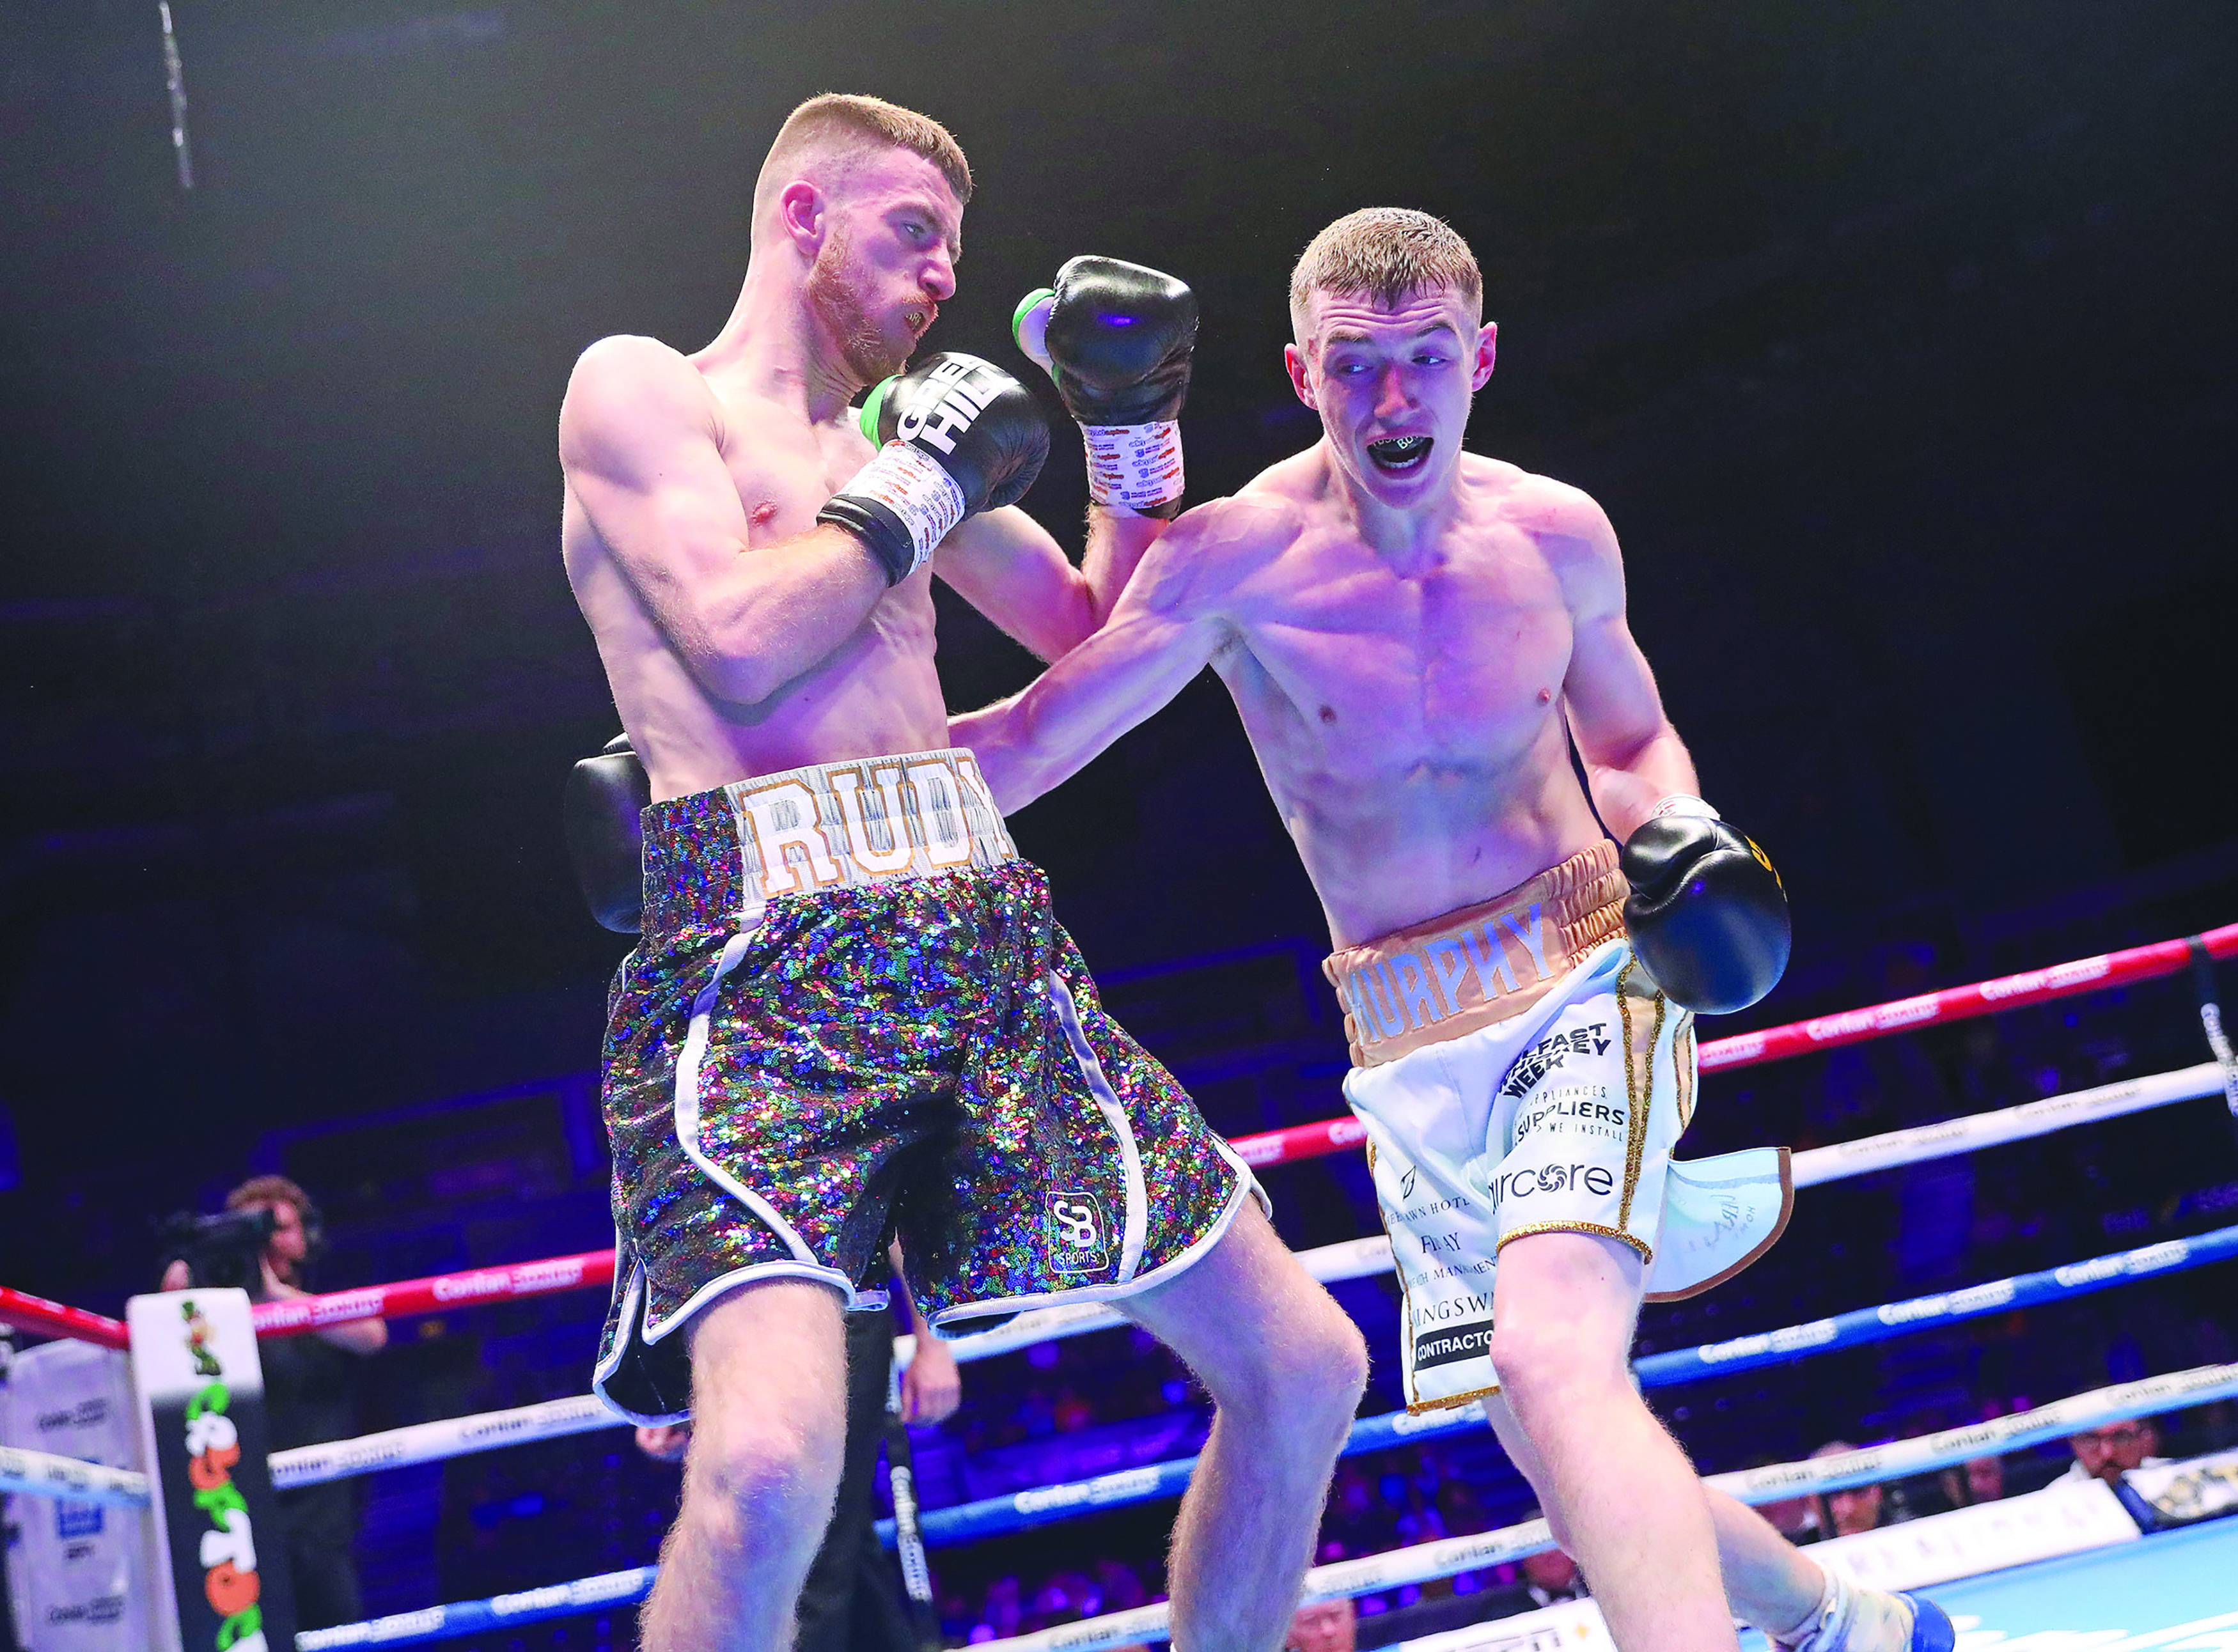 Colm Murphy claimed the BUI Celtic featherweight title with a points win over Ruadhan Farrell at the SSE Arena in August and insists Liam Gaynor won’t dethrone him on Saturday night